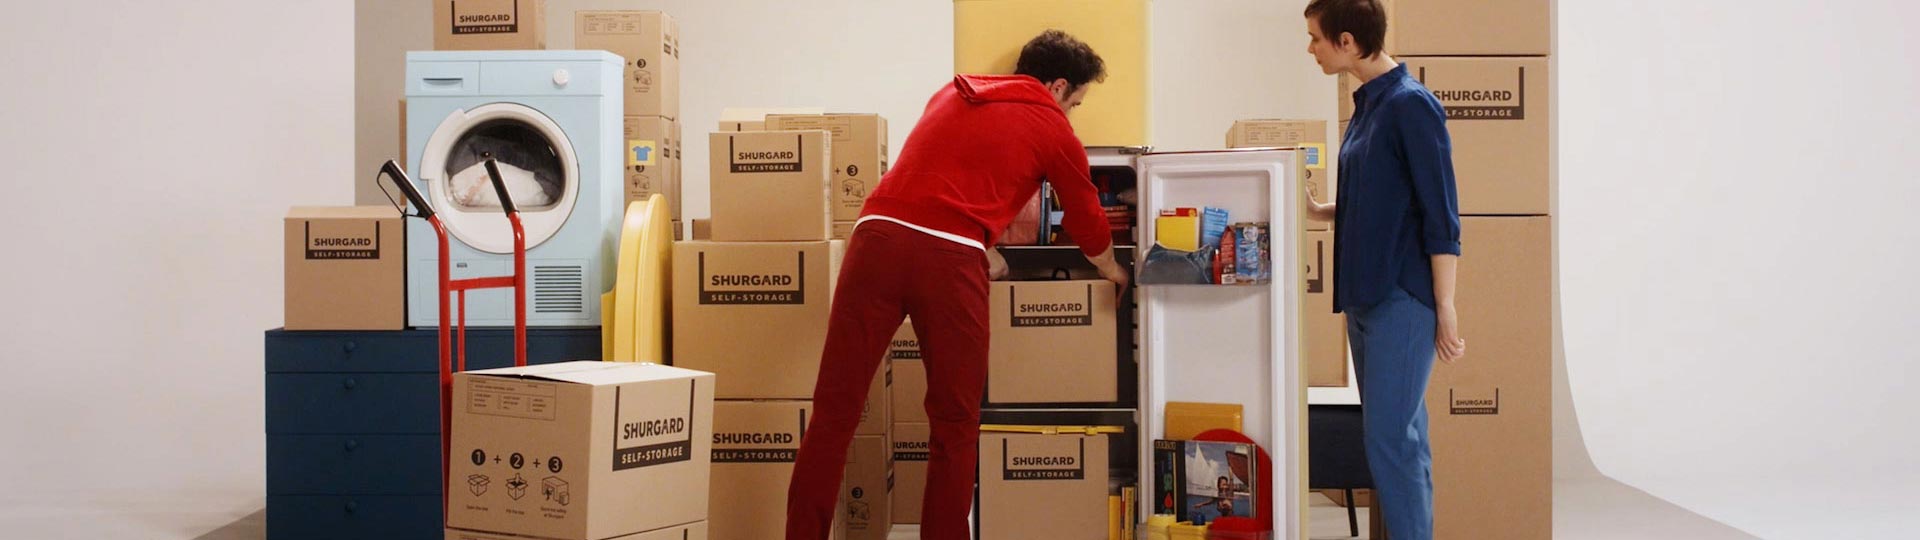 How to pack for a move. Packing tips from Shurgard Self Storage